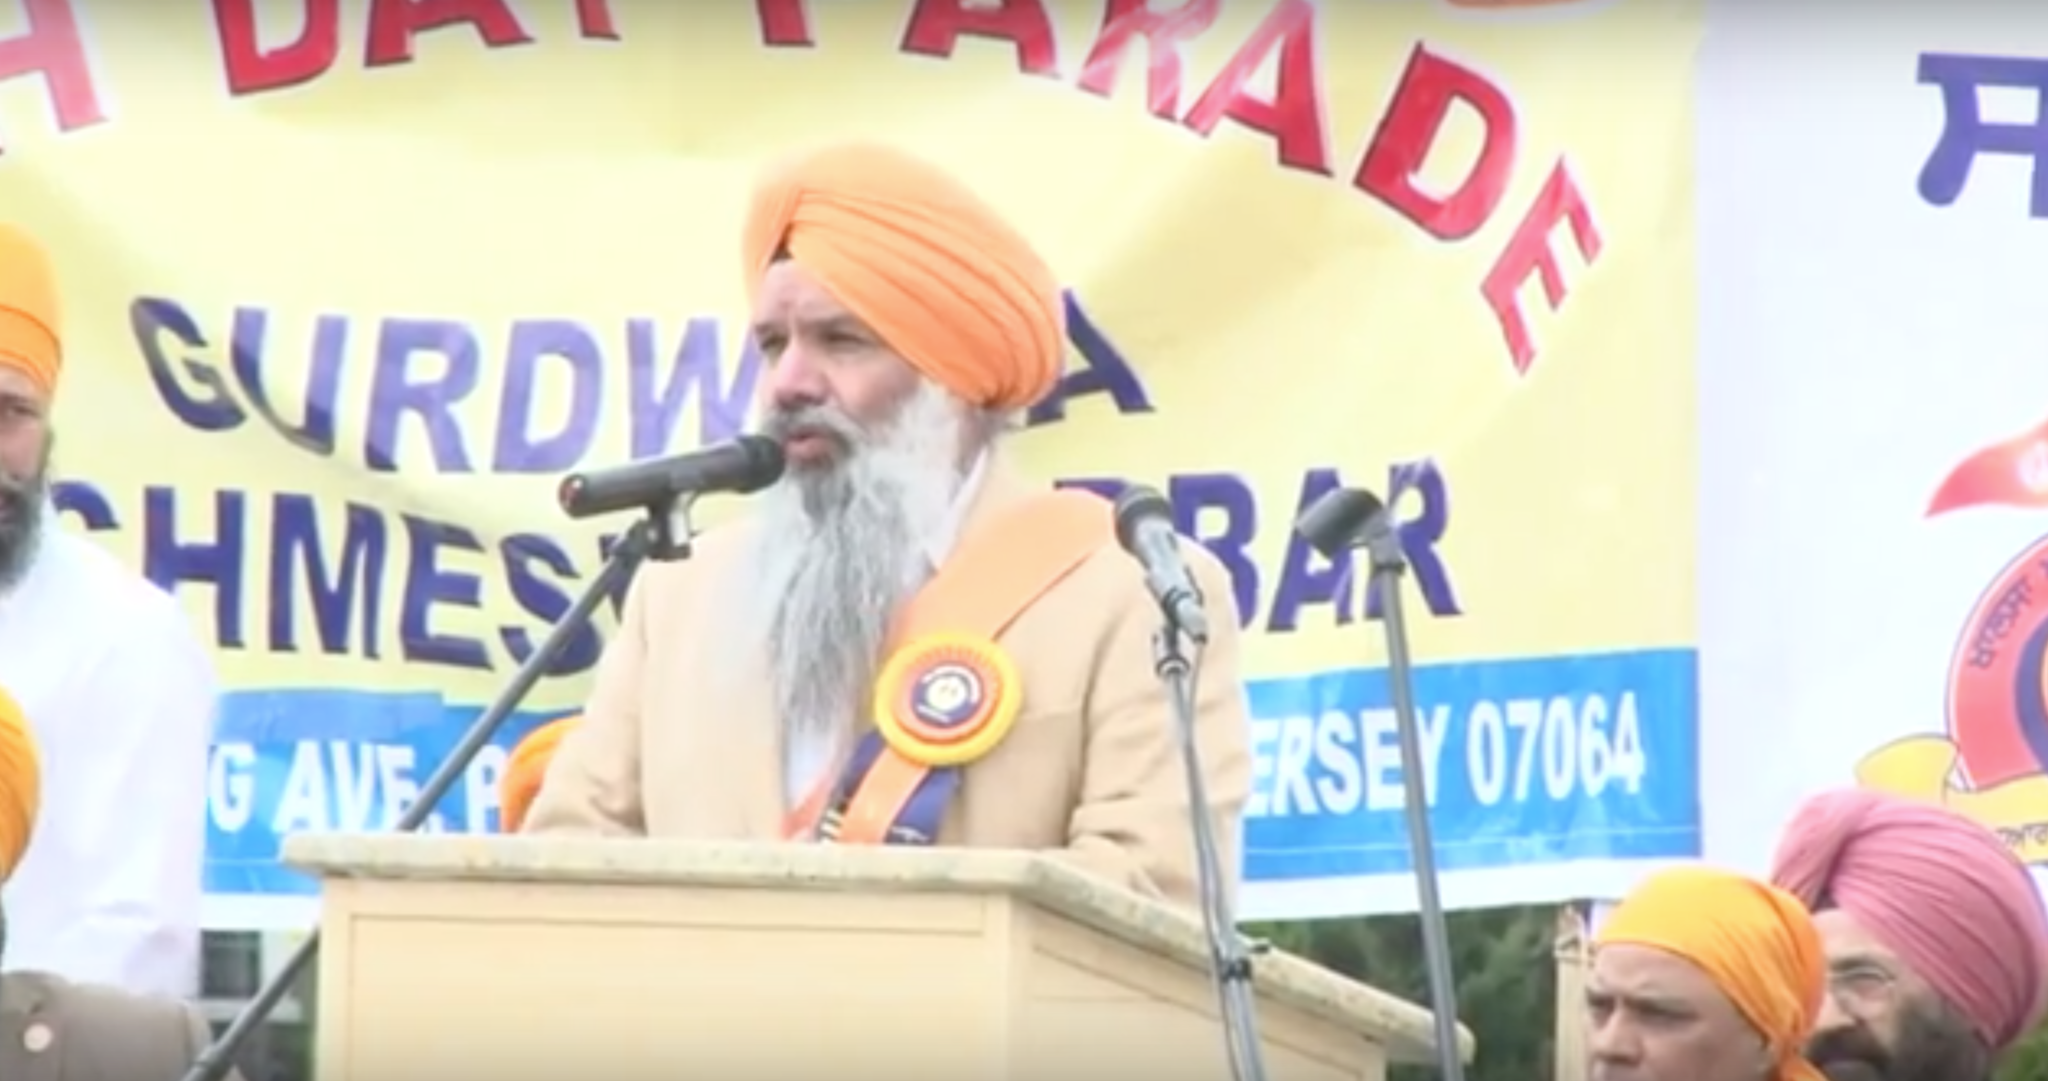 NYC Mayor appoints Gurdev Singh Kang and Faiza Patel to Human Rights commission